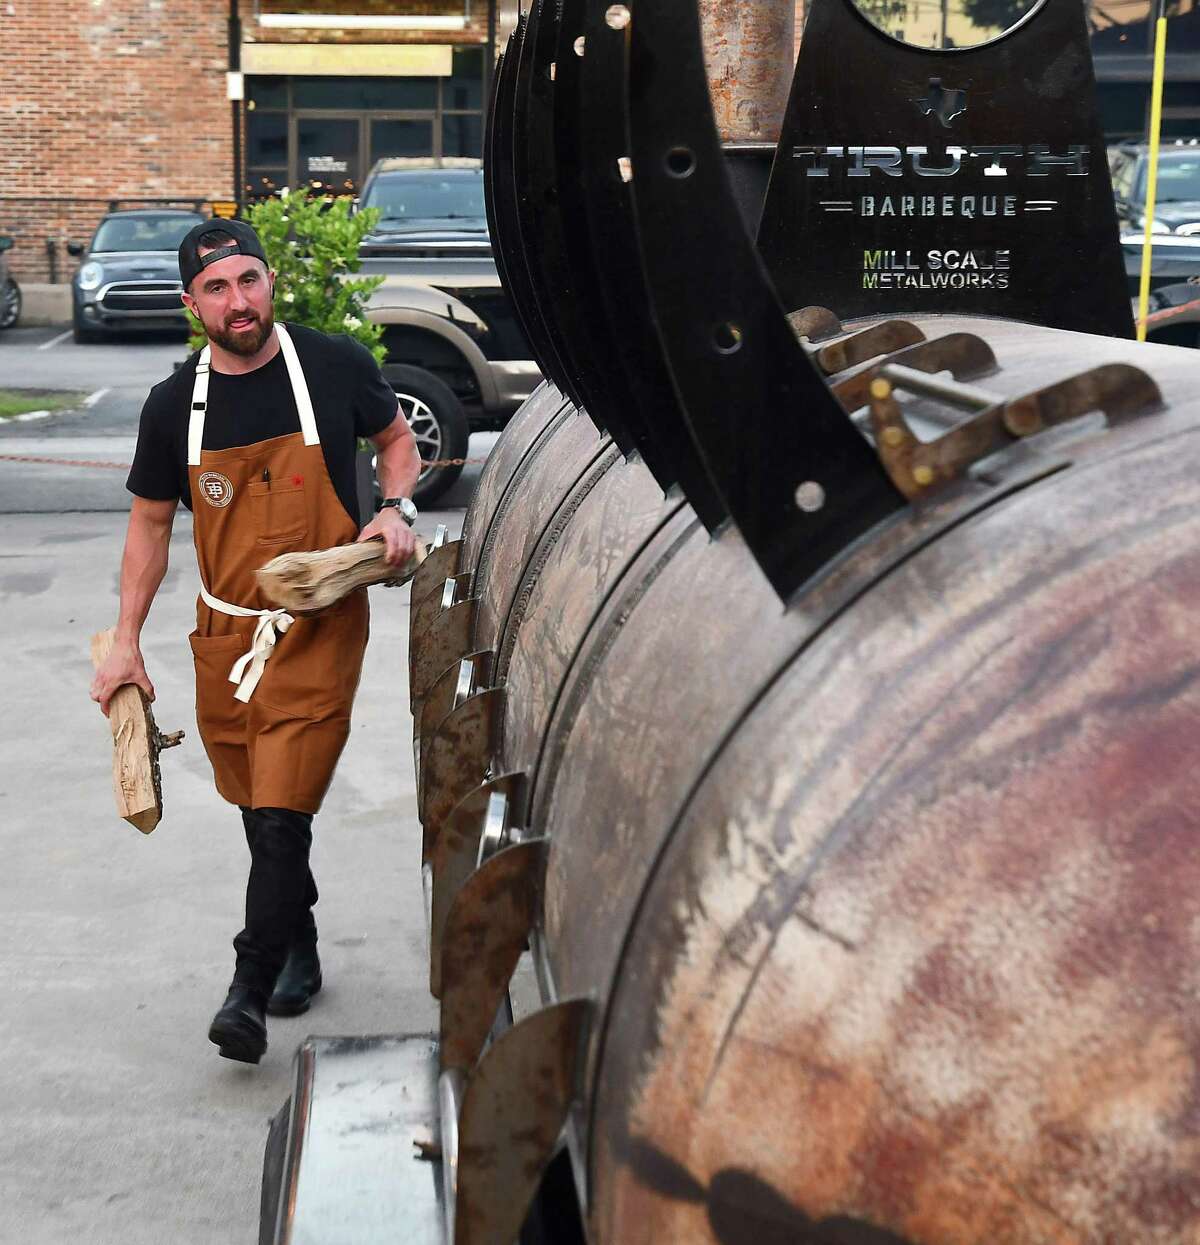 Truth BBQ pitmaster/owner Leonard Botello carries wood to his smoker in the parking lot of Bludorn restaurant Thursday May 12,2022. Botello and Bludorn chef/owner Aaron Bludorn teamed up for an exclusive collaboration dinner benefitting World Central Kitchen at Bludorn Thursday, May 12,2022.